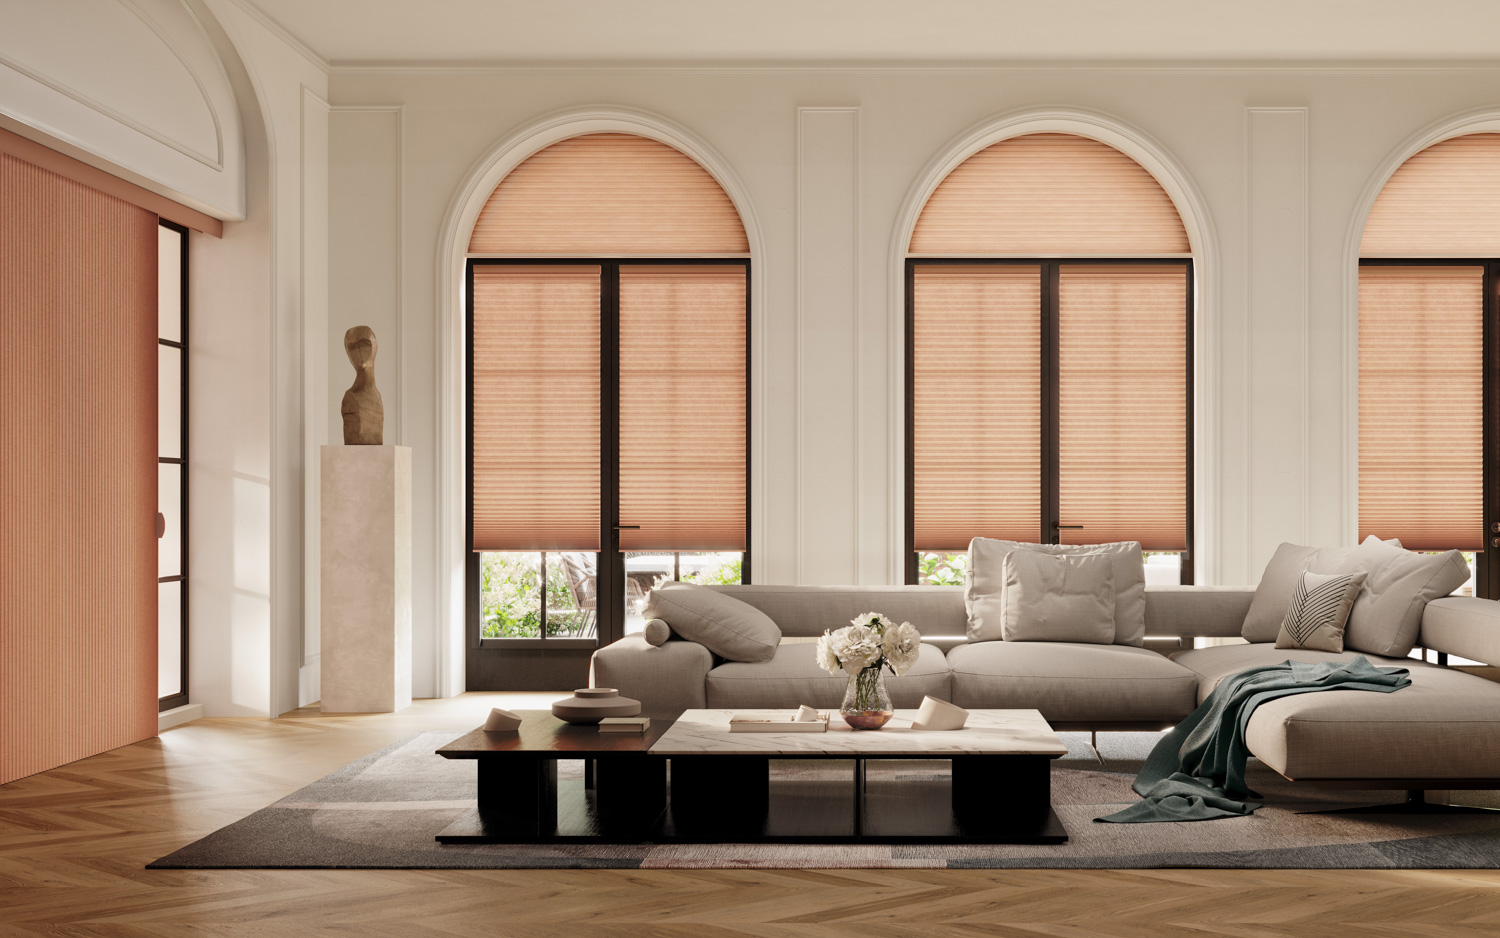 Hunter Douglas Duette® Cellular Shades in a living room with arched windows and a couch.